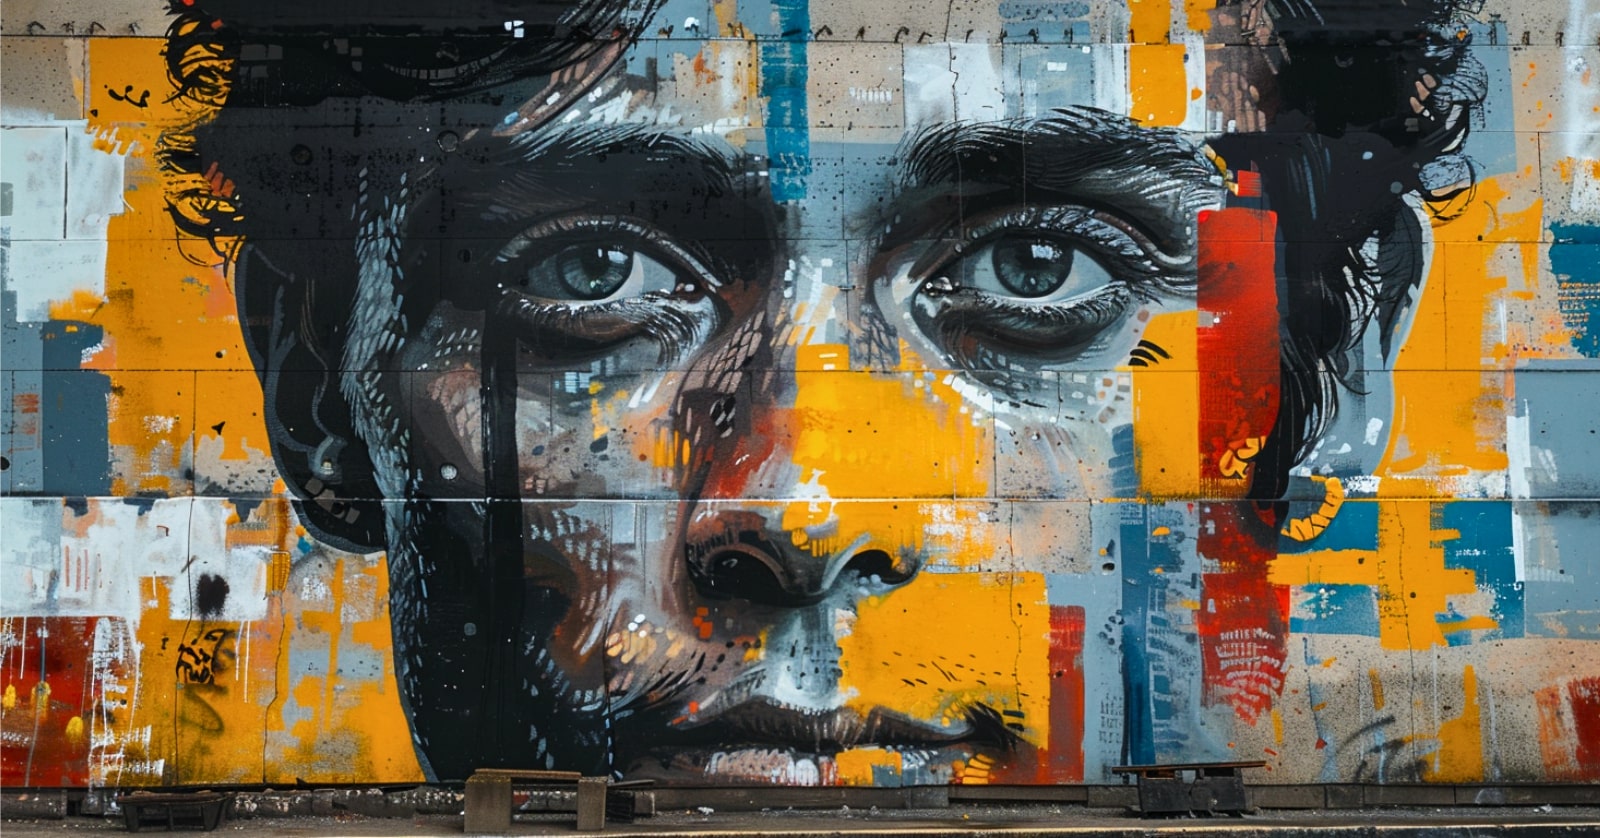 graffiti art of a man's face with blues and reds and oranges along with black details